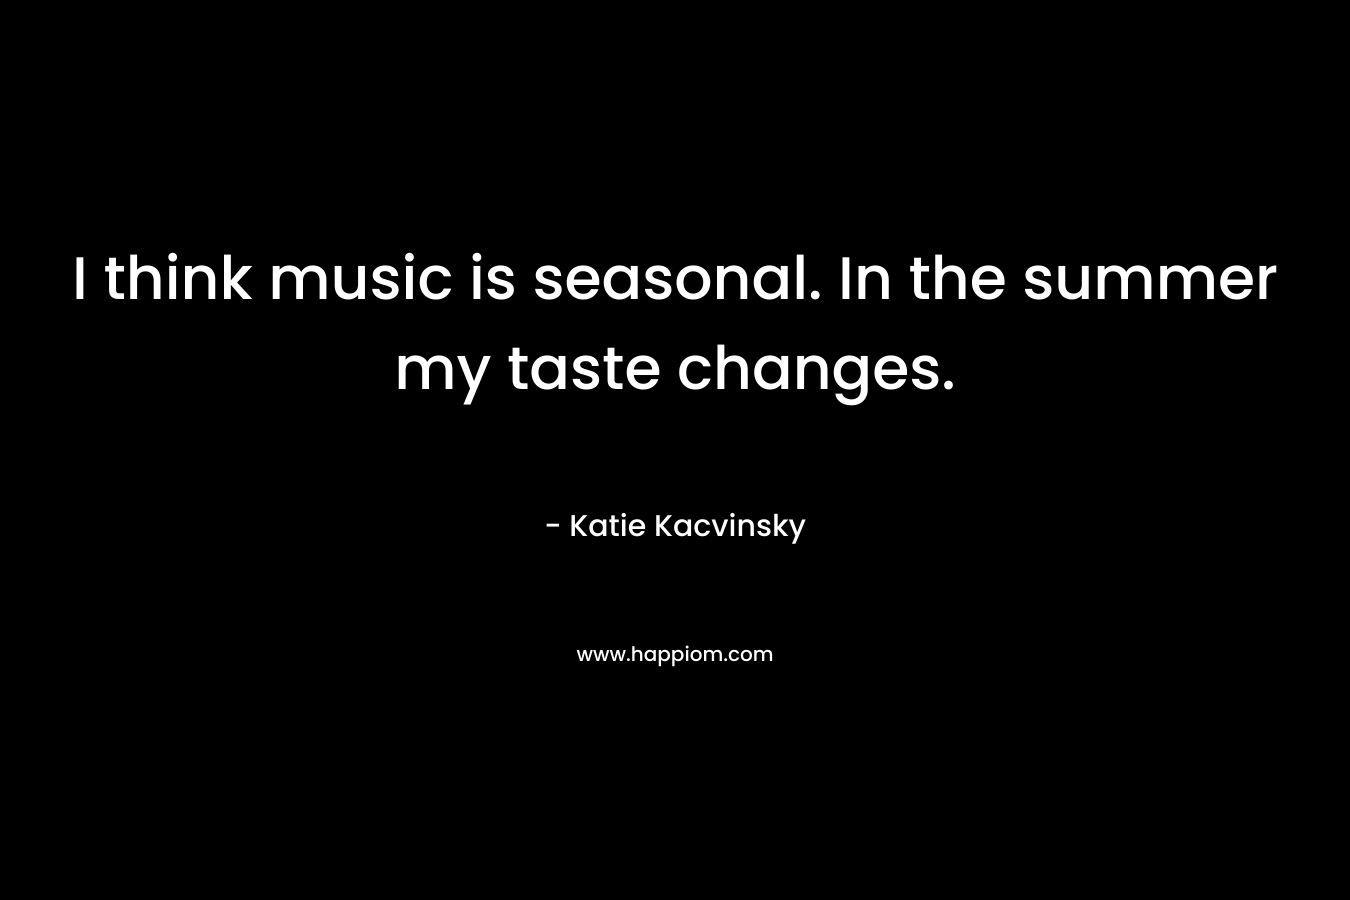 I think music is seasonal. In the summer my taste changes.